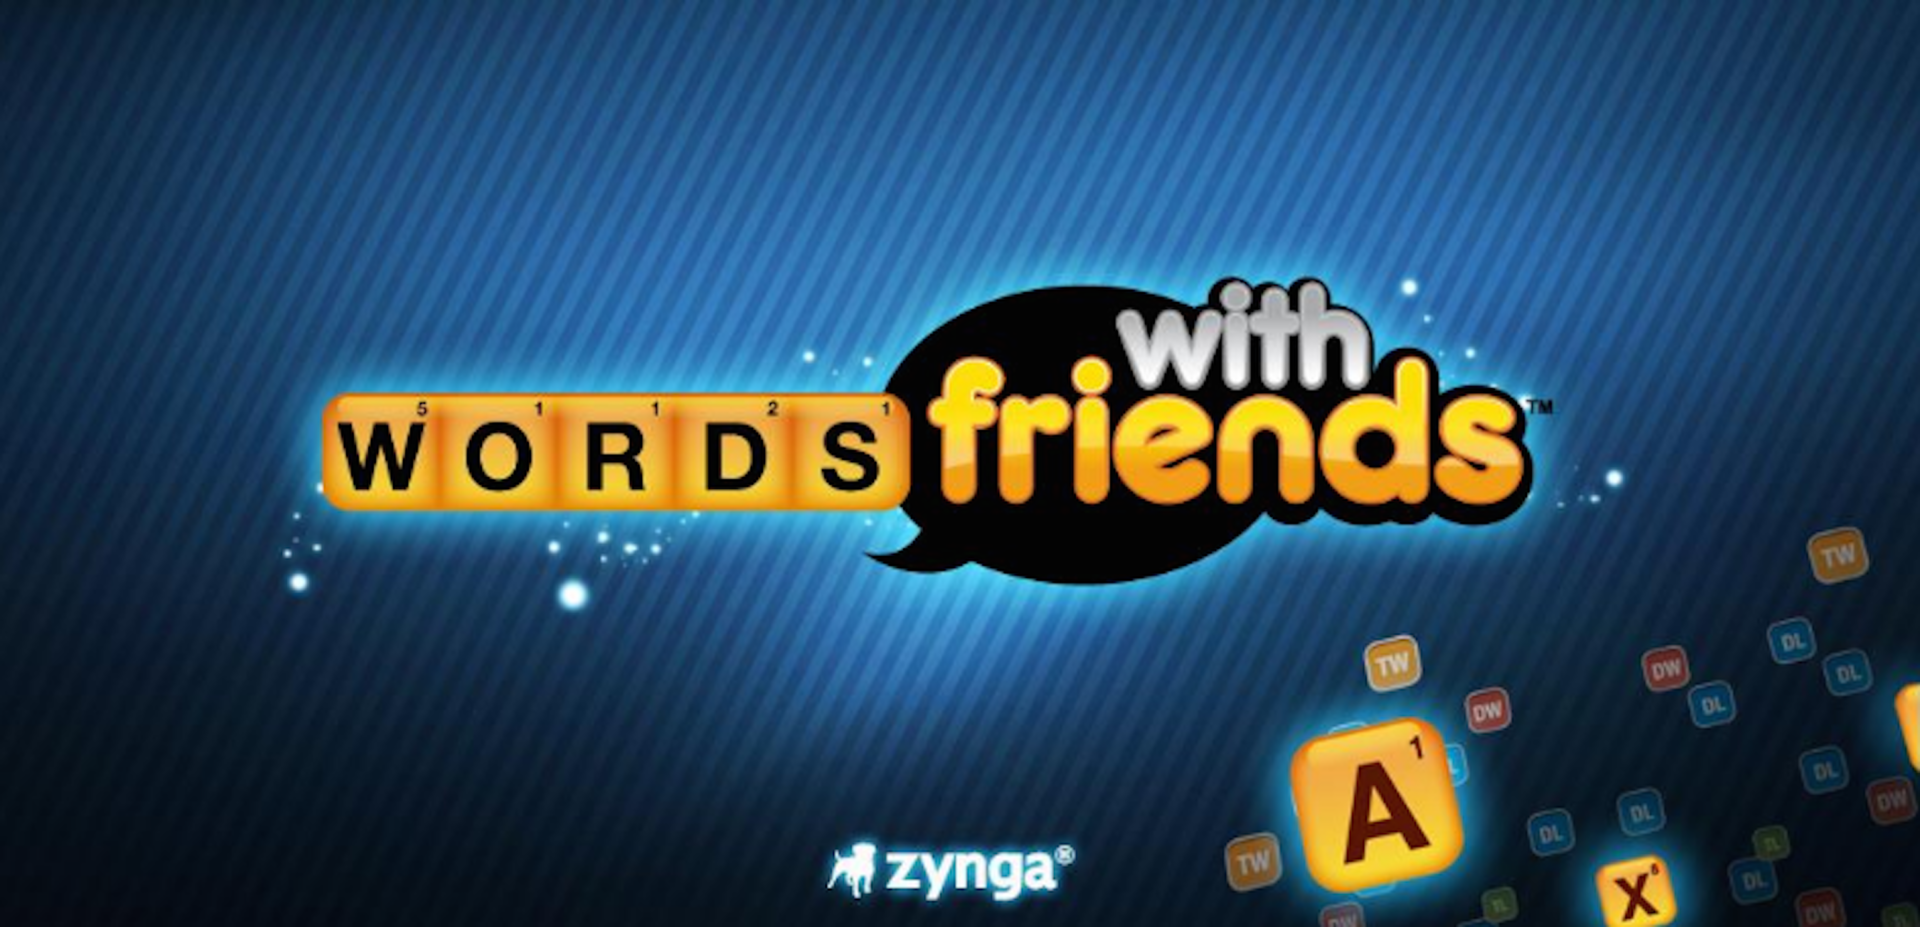 Слово friends. Words with friends. Виндовс френдс. Words with friends 2 Word game. "Words with friends" что за игра.